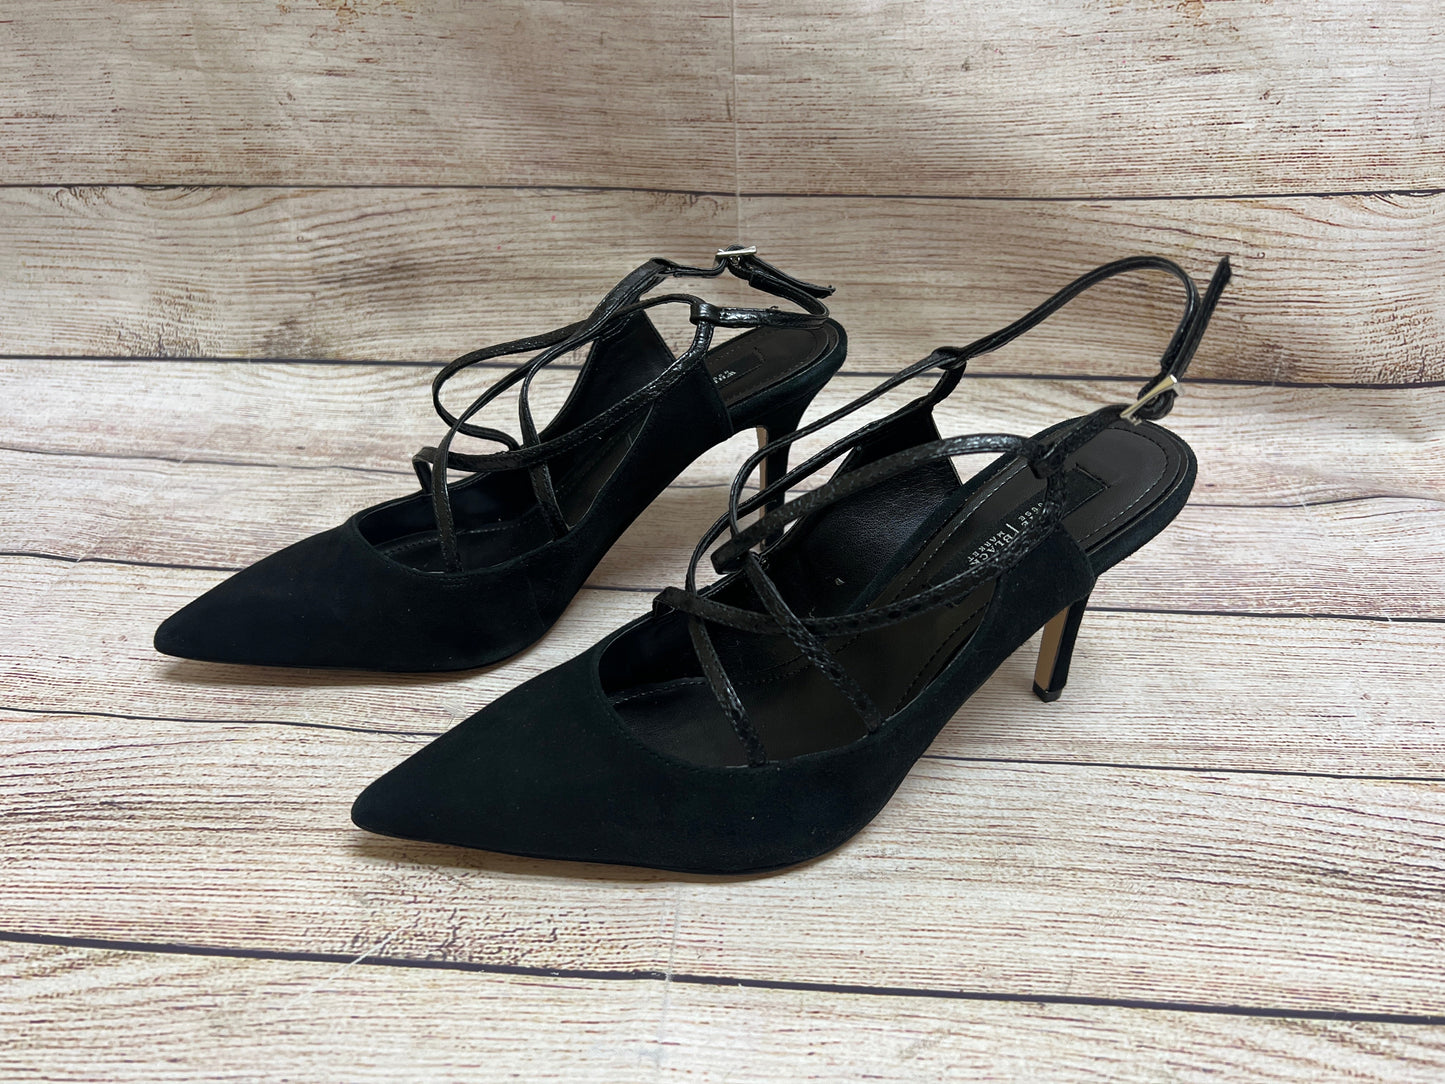 Shoes Heels Stiletto By White House Black Market  Size: 9